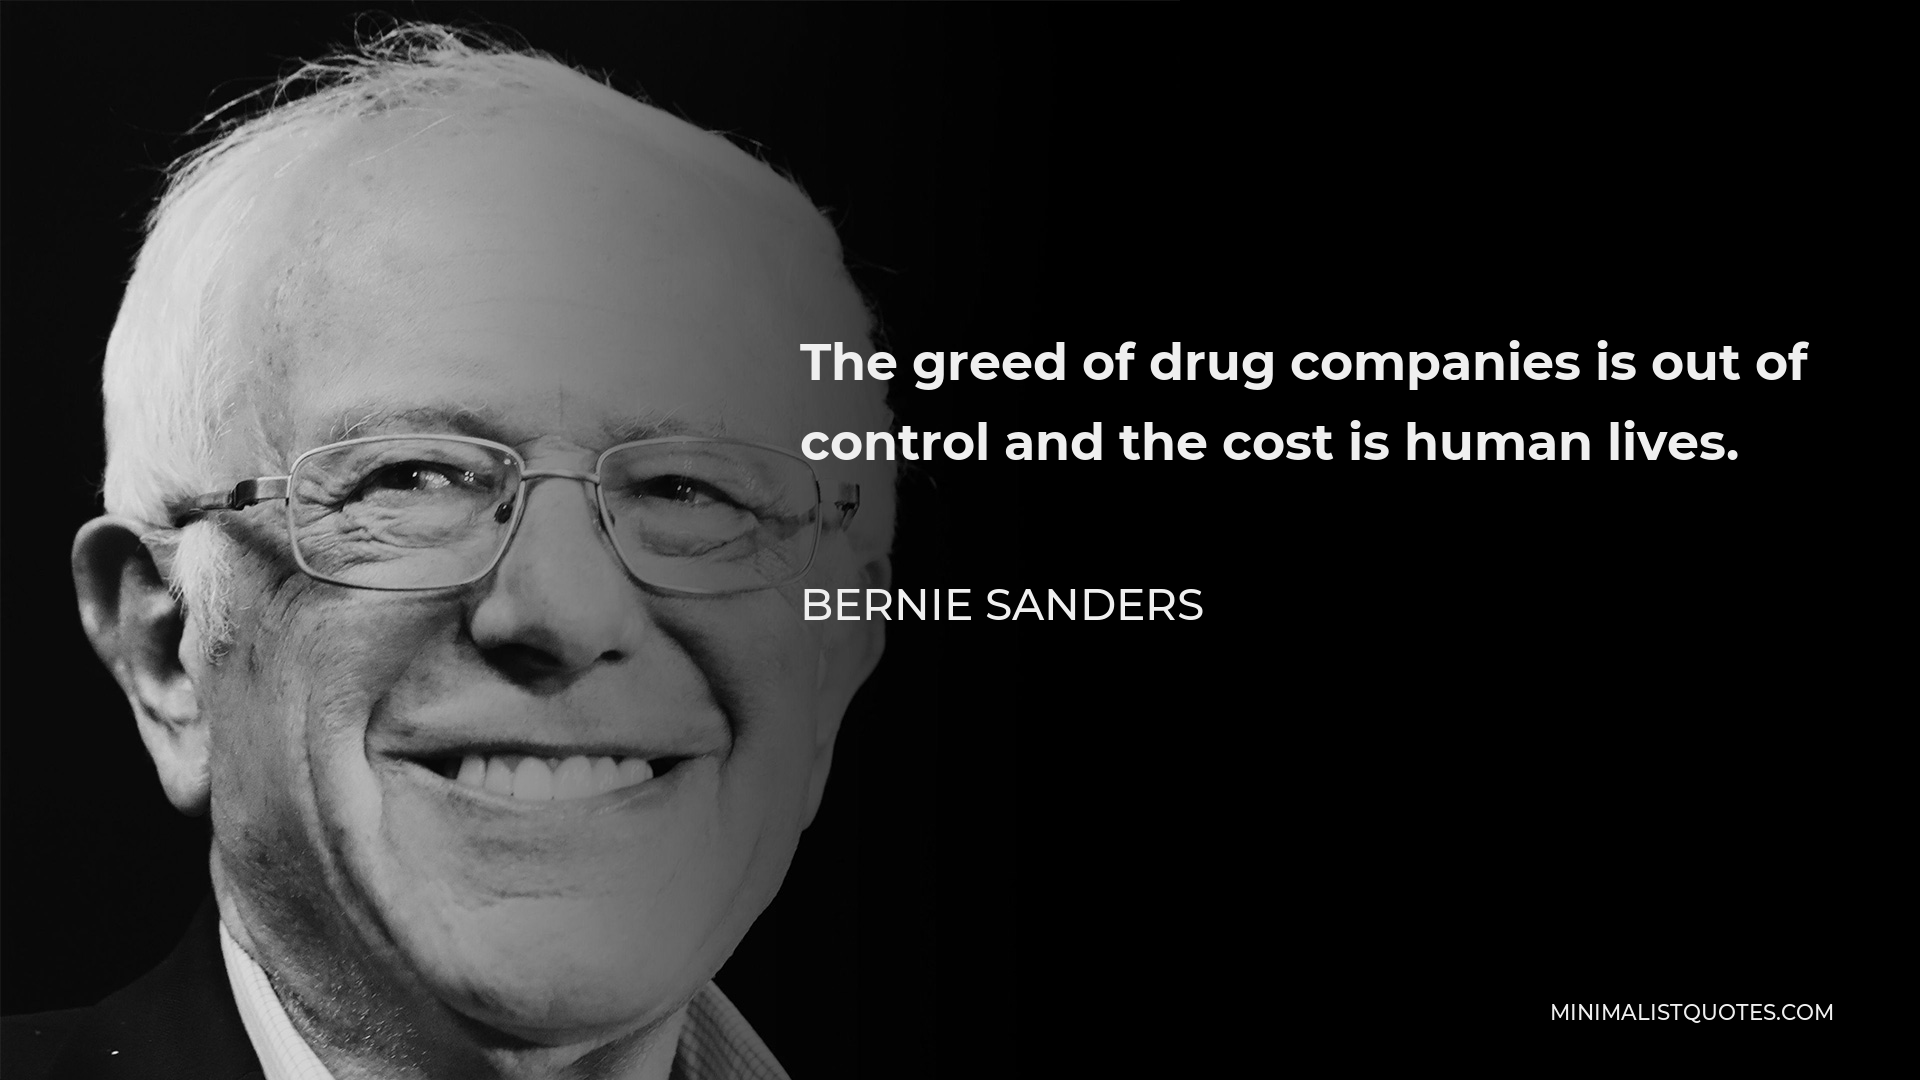 Bernie Sanders Quote - The greed of drug companies is out of control and the cost is human lives.